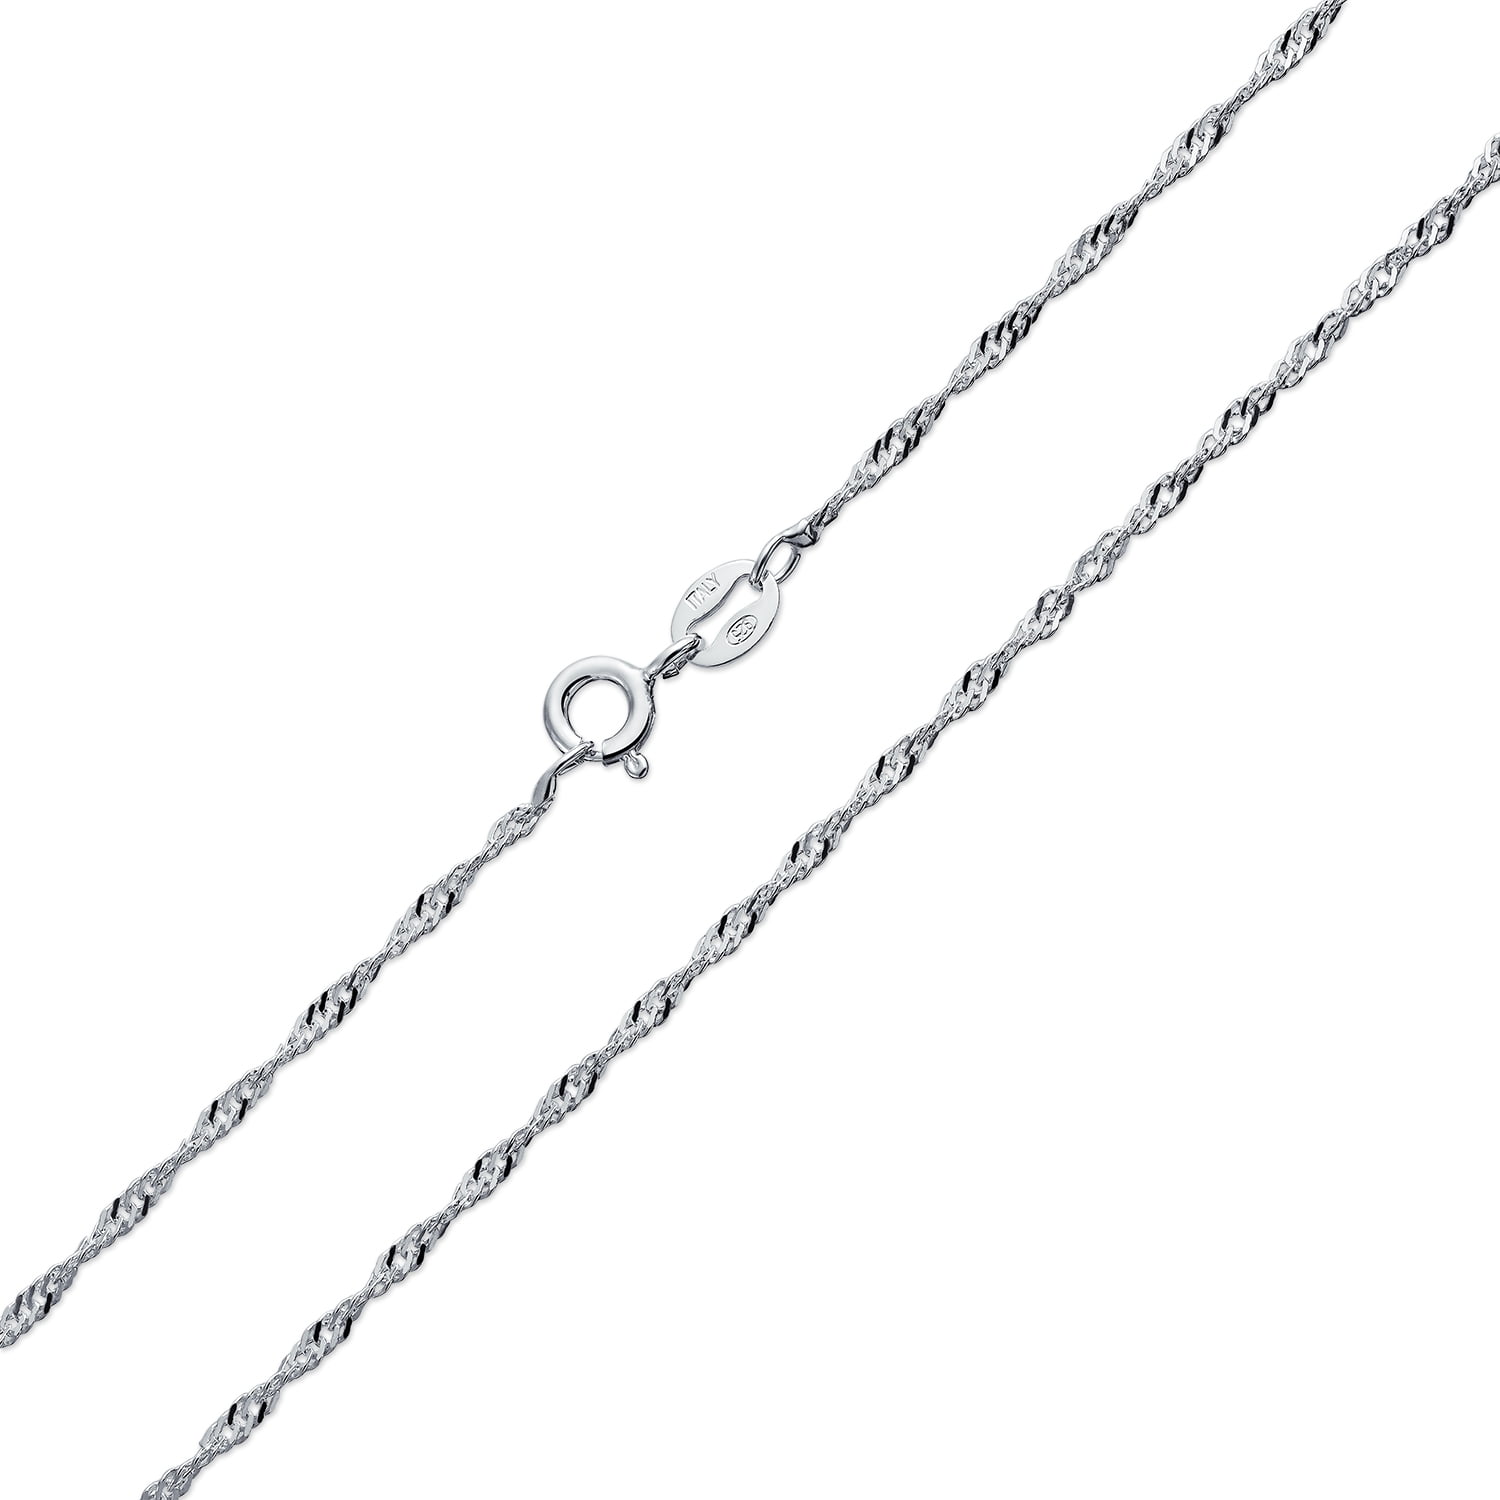 ITALY 925 Sterling Silver CABLE Chain Necklace-Dainty Cable Necklace-16" 18" 20"